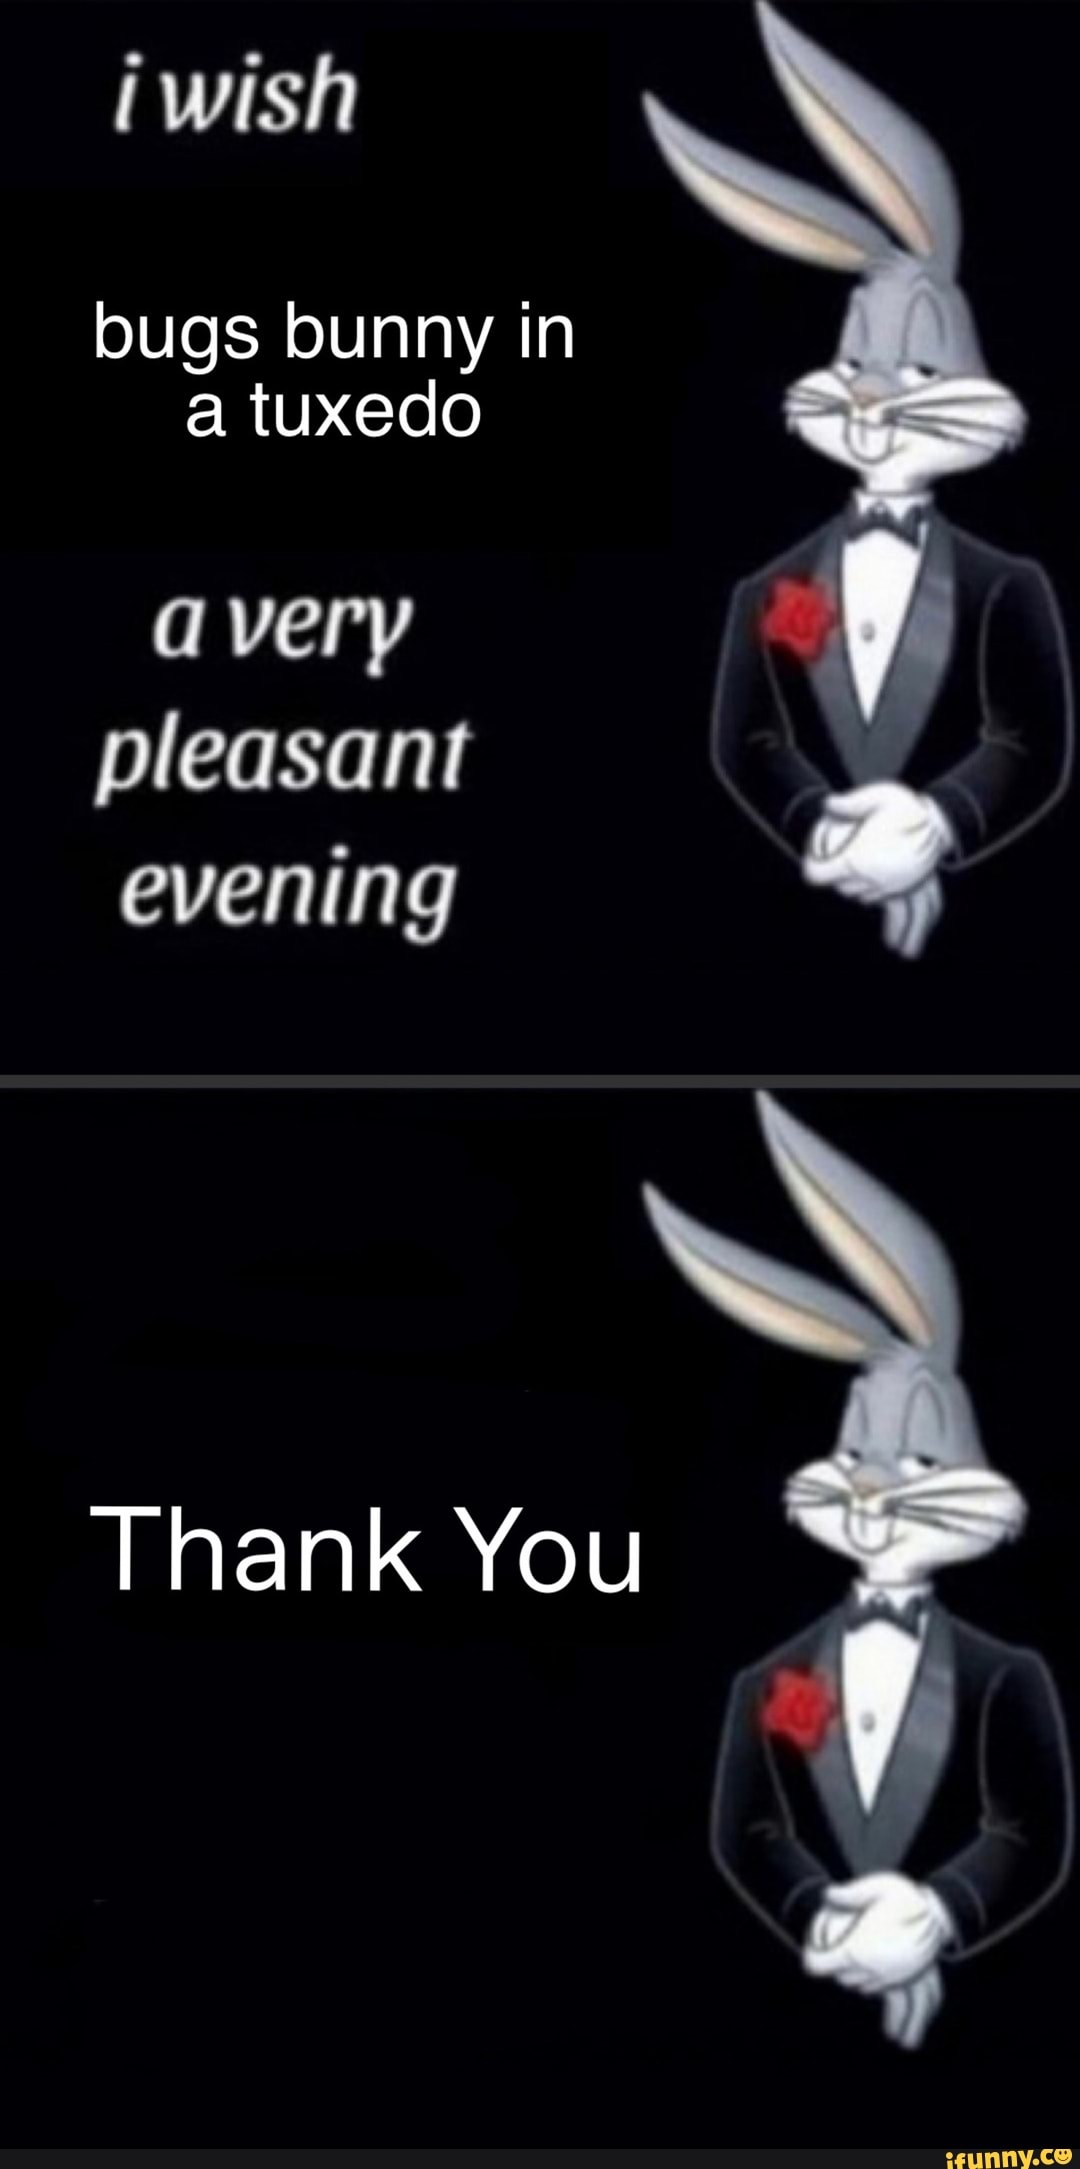 Wi Bugs Bunny In A Tuxedo Avery Pleasant Evening Thank You Ifunny